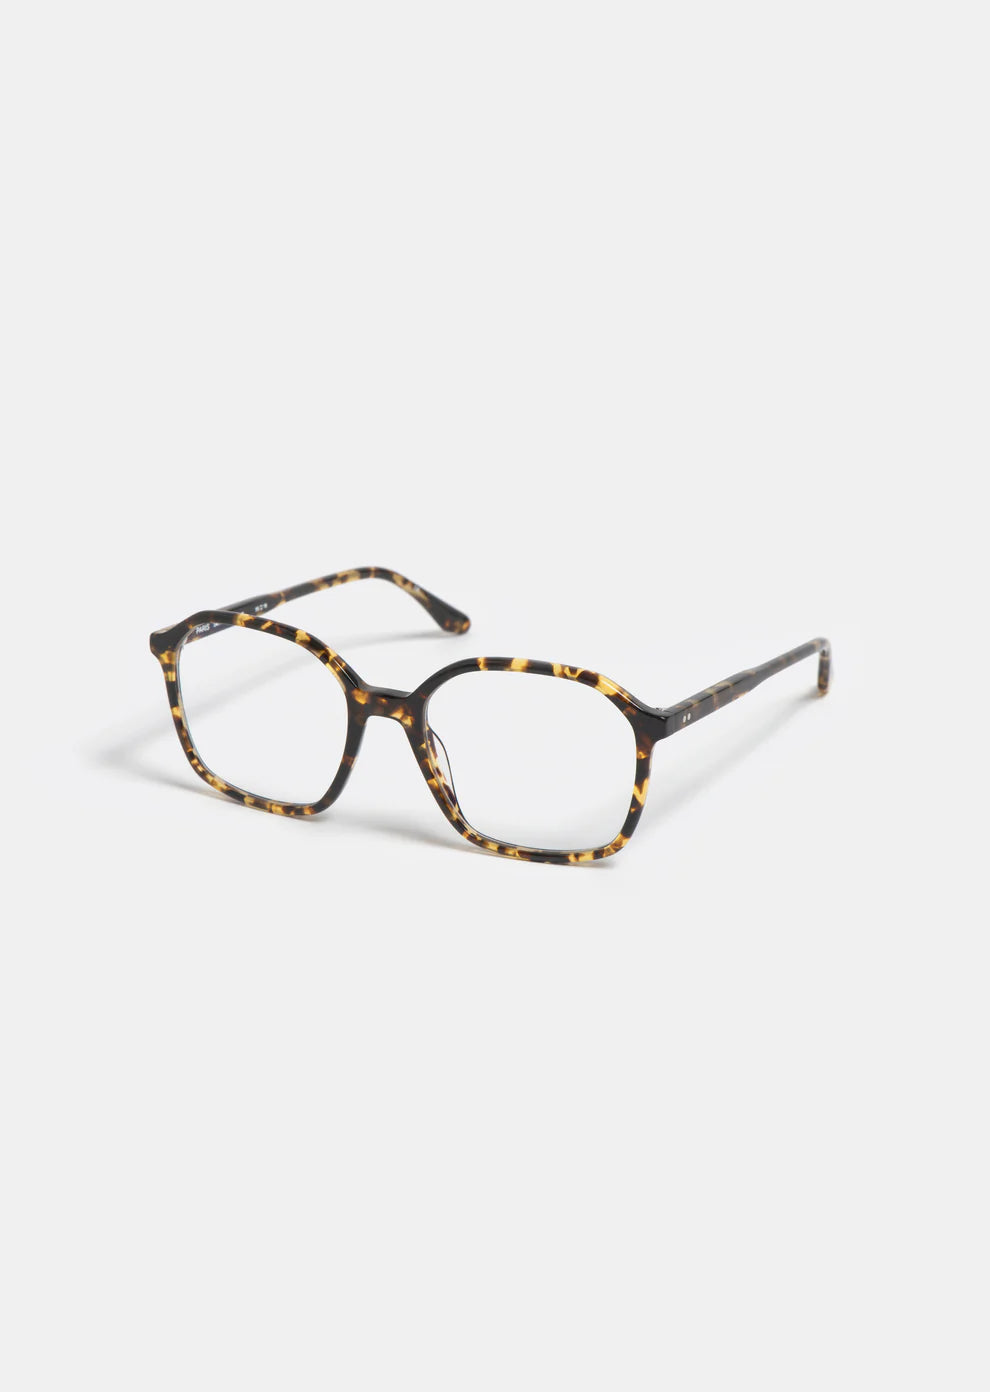 Lunette de vue PETER AND MAY LT12 Alma yellow Tortoise